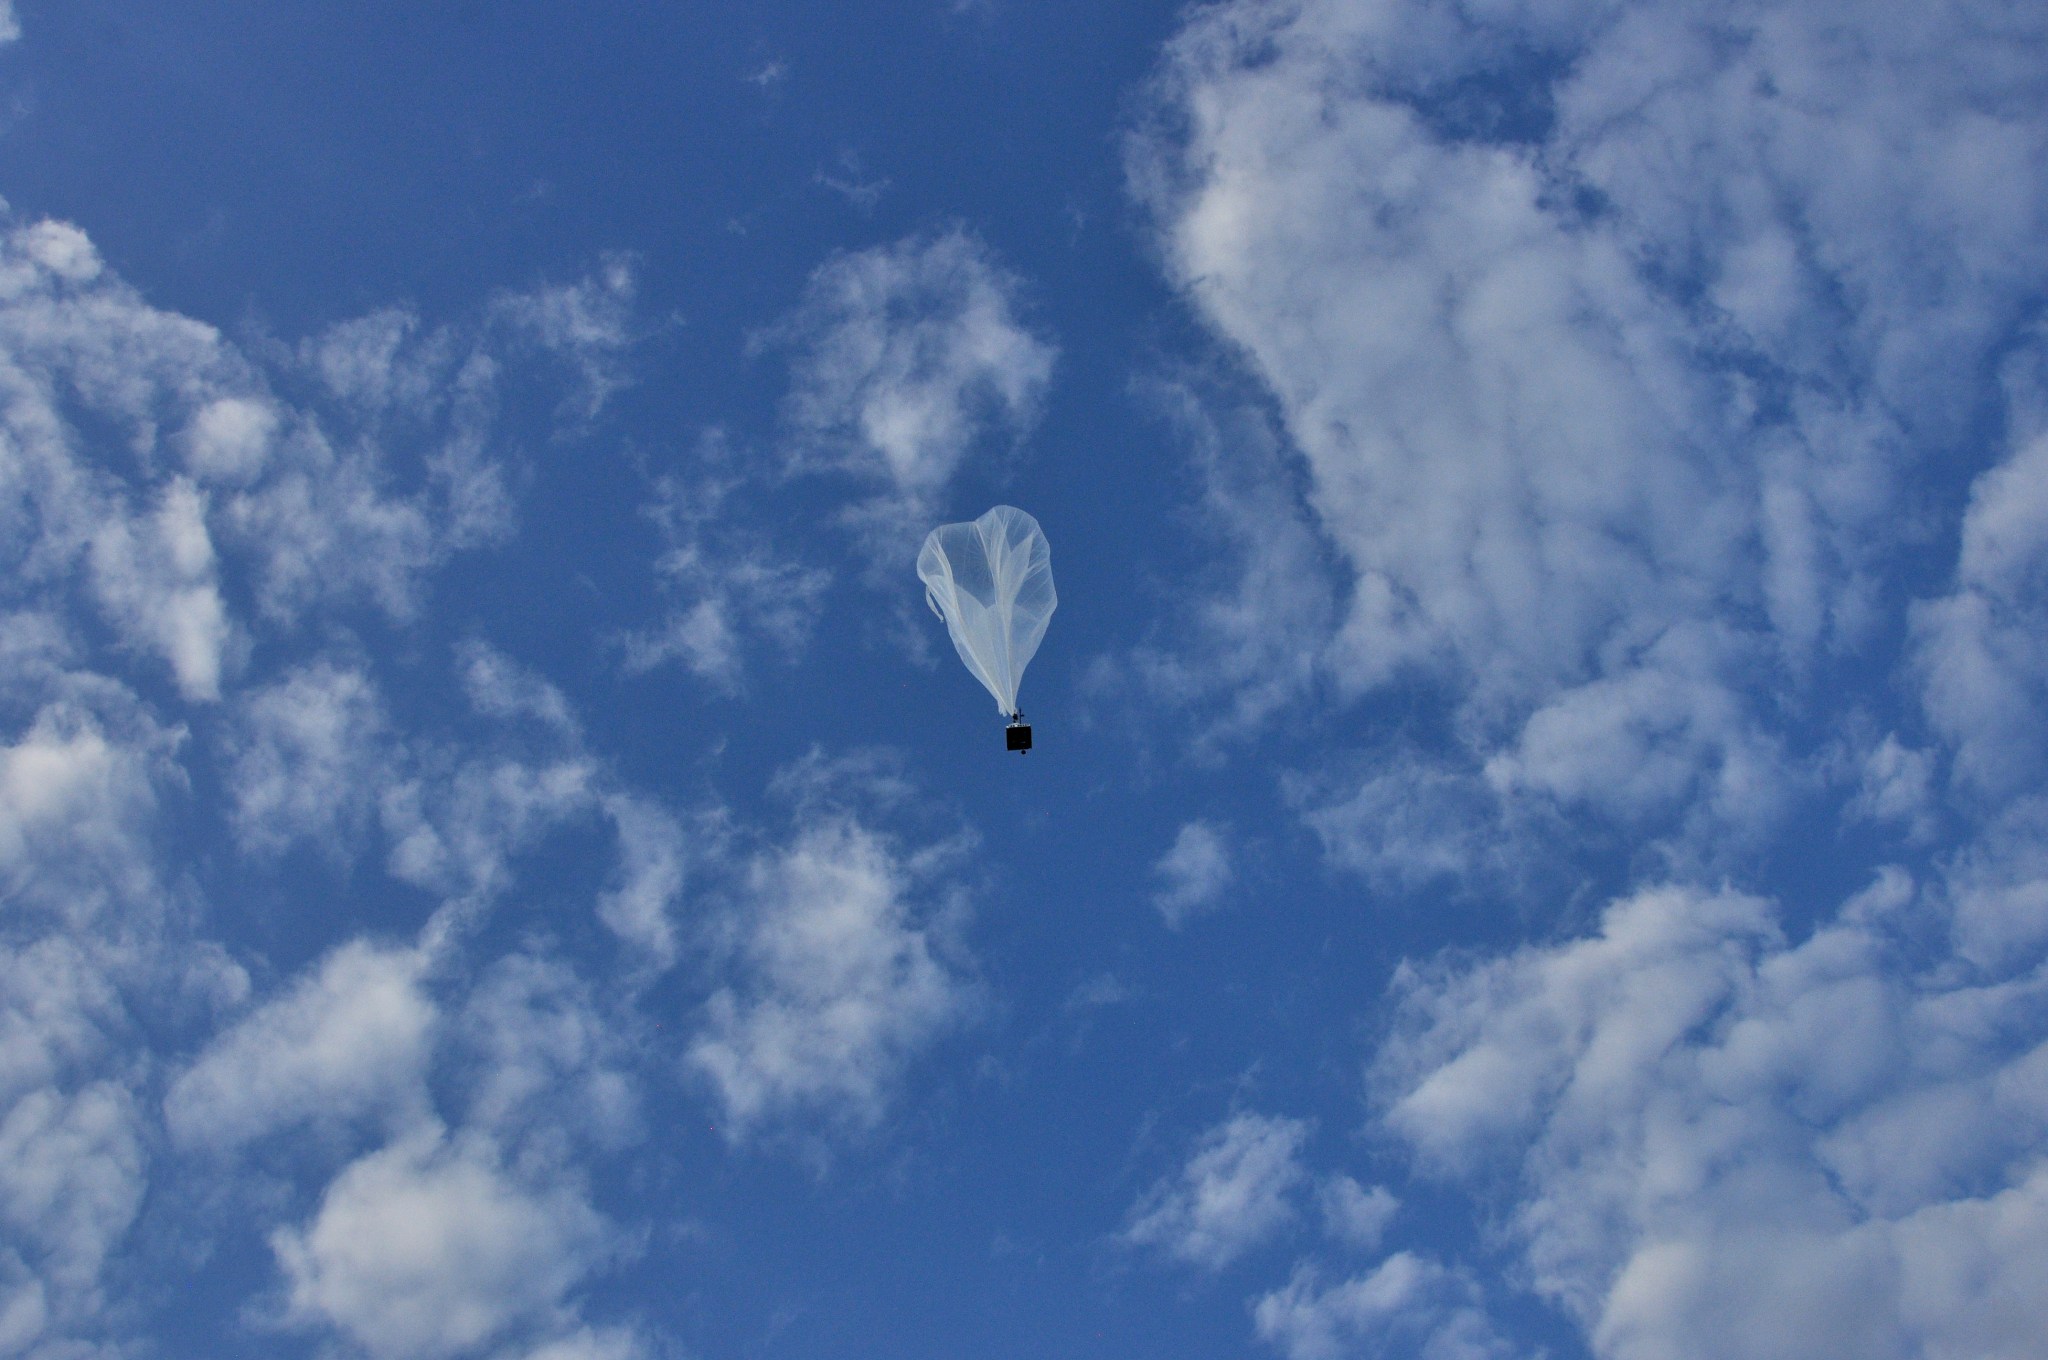 White/translucent balloon carrying a small rectangular load in center frame makes its ascent. Blue sky dotted with light clouds in background.